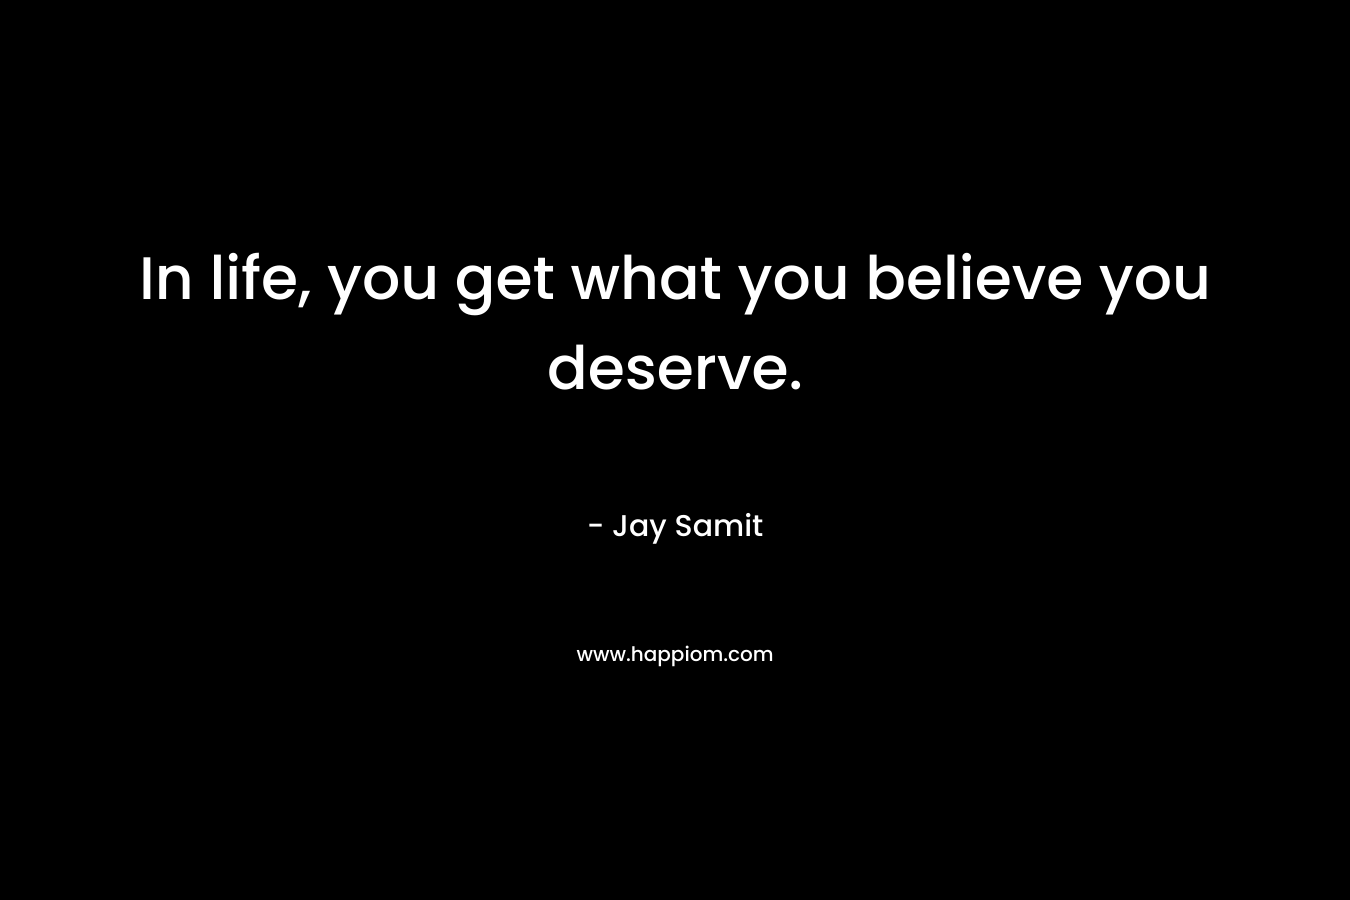 In life, you get what you believe you deserve.